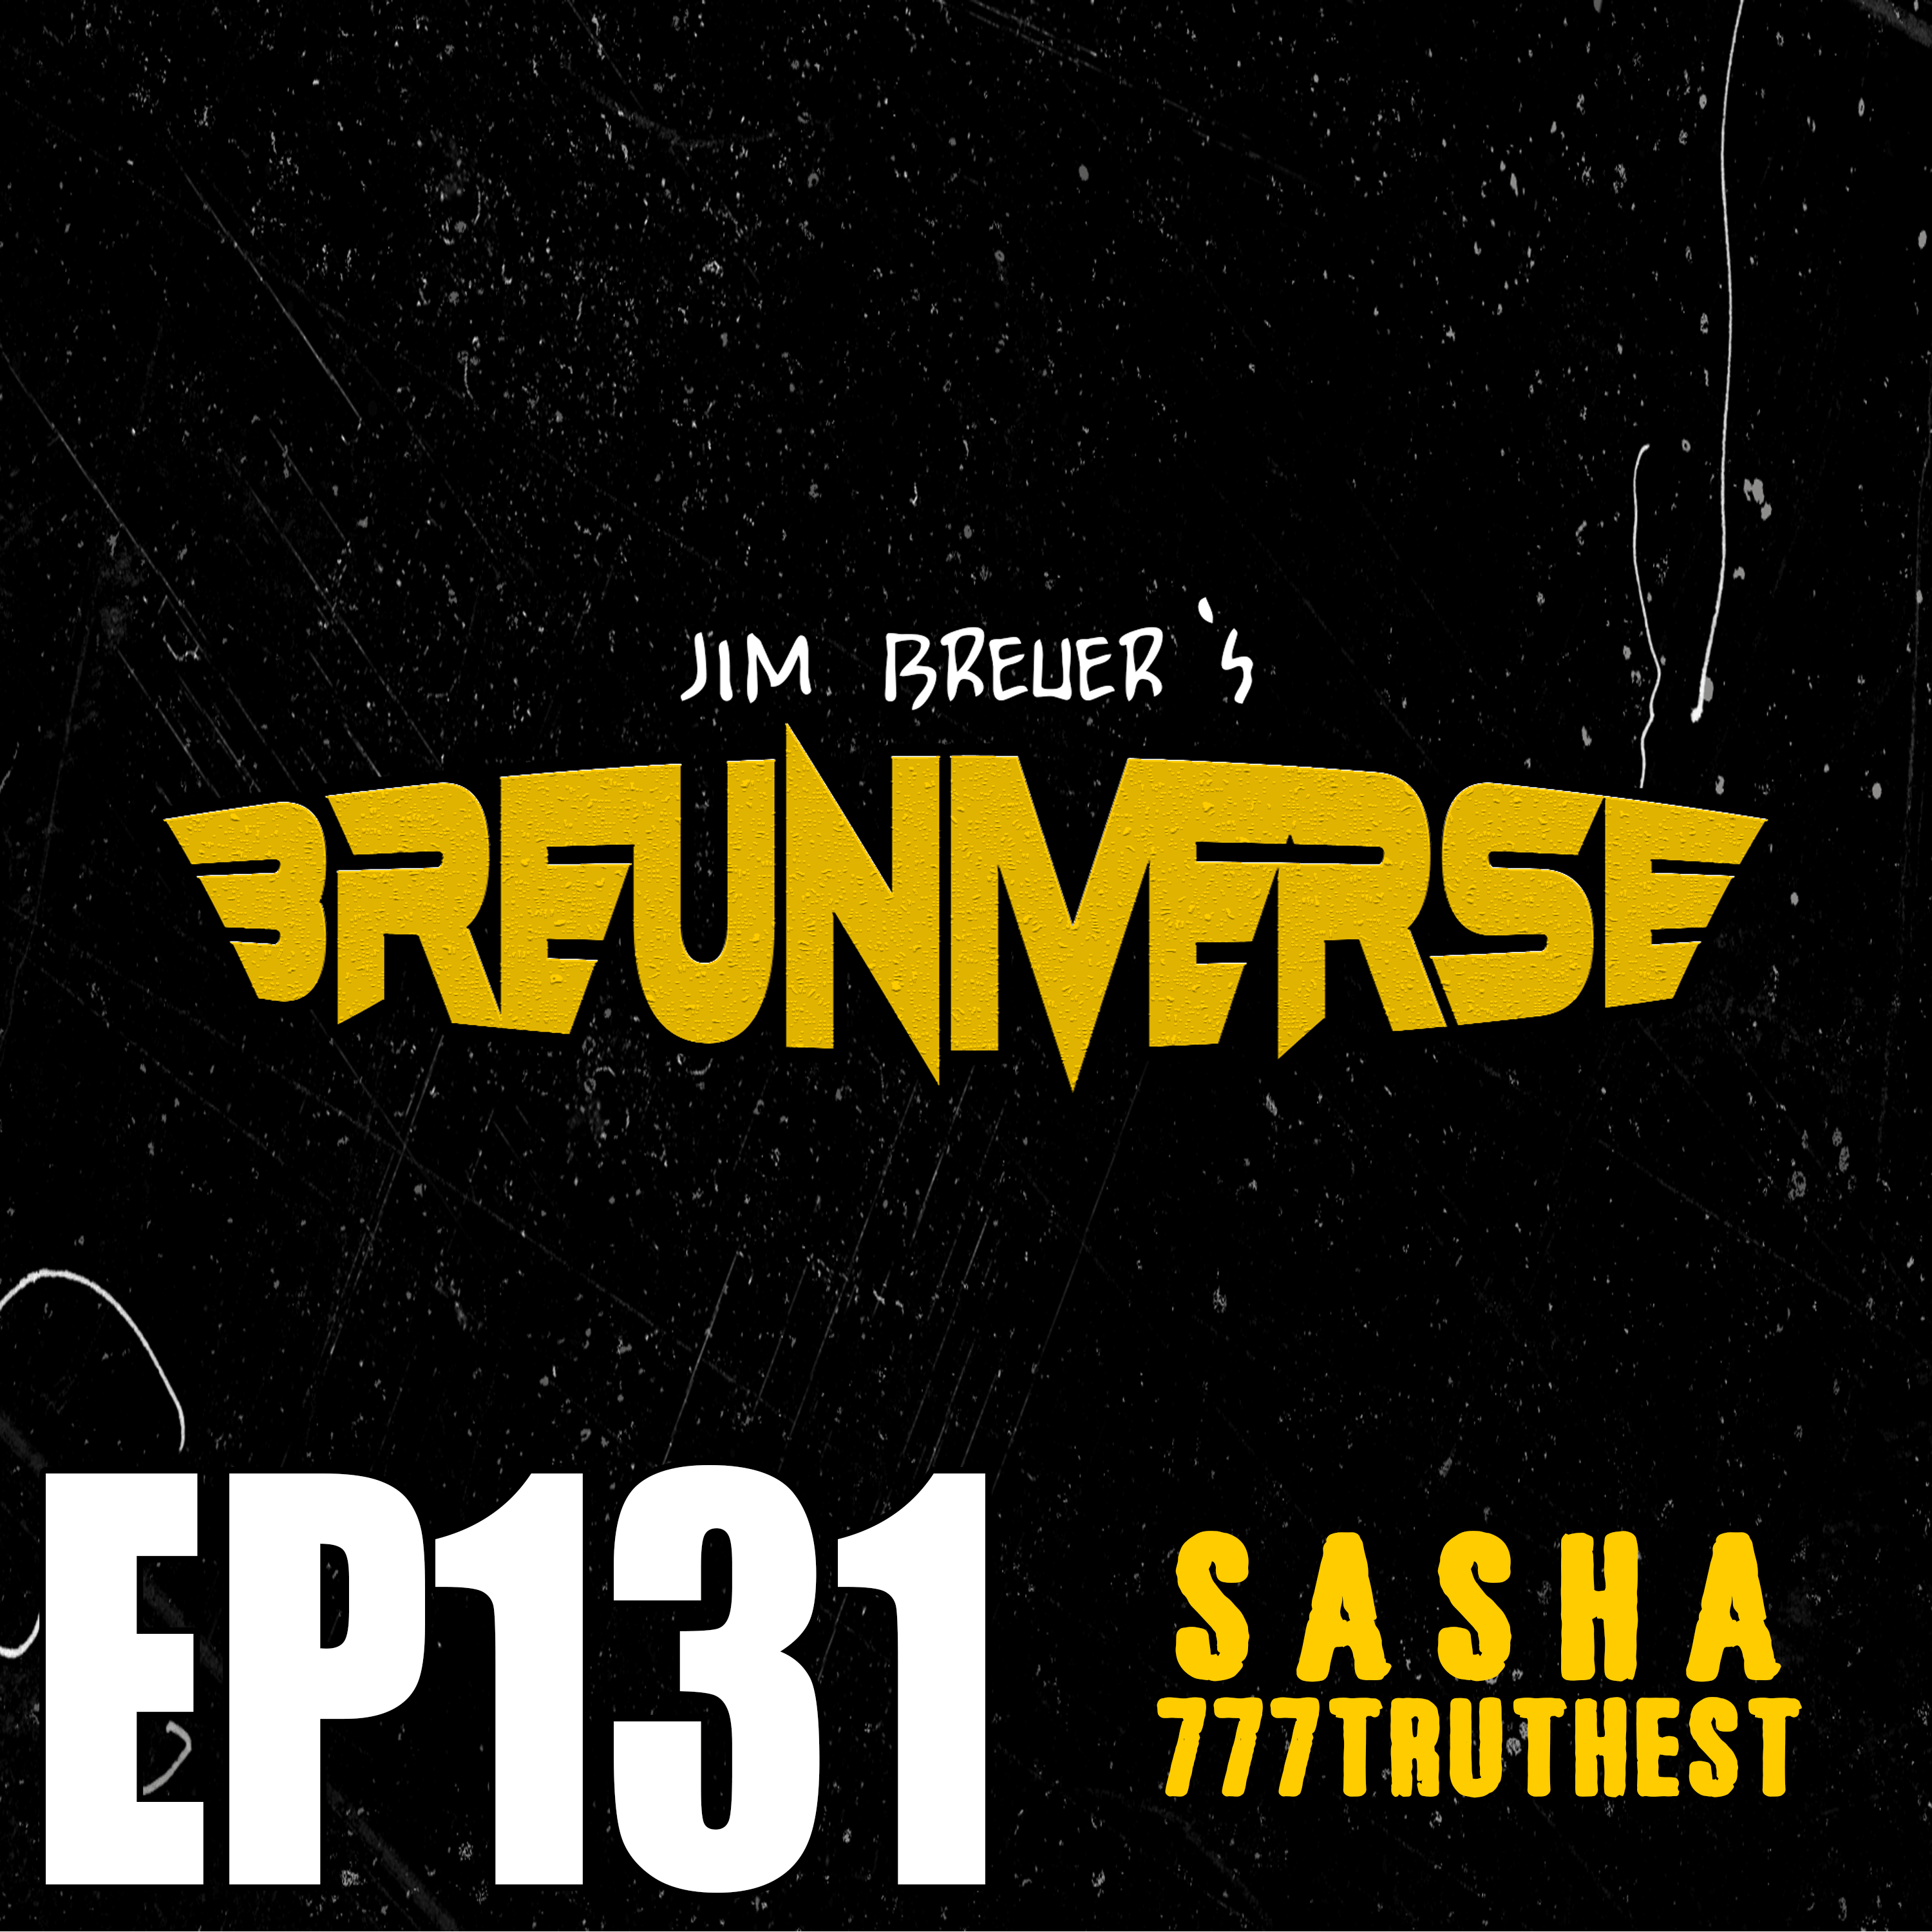 Seeking truth with 777Truthest | Jim Breuer's Breuniverse Podcast Ep. 131